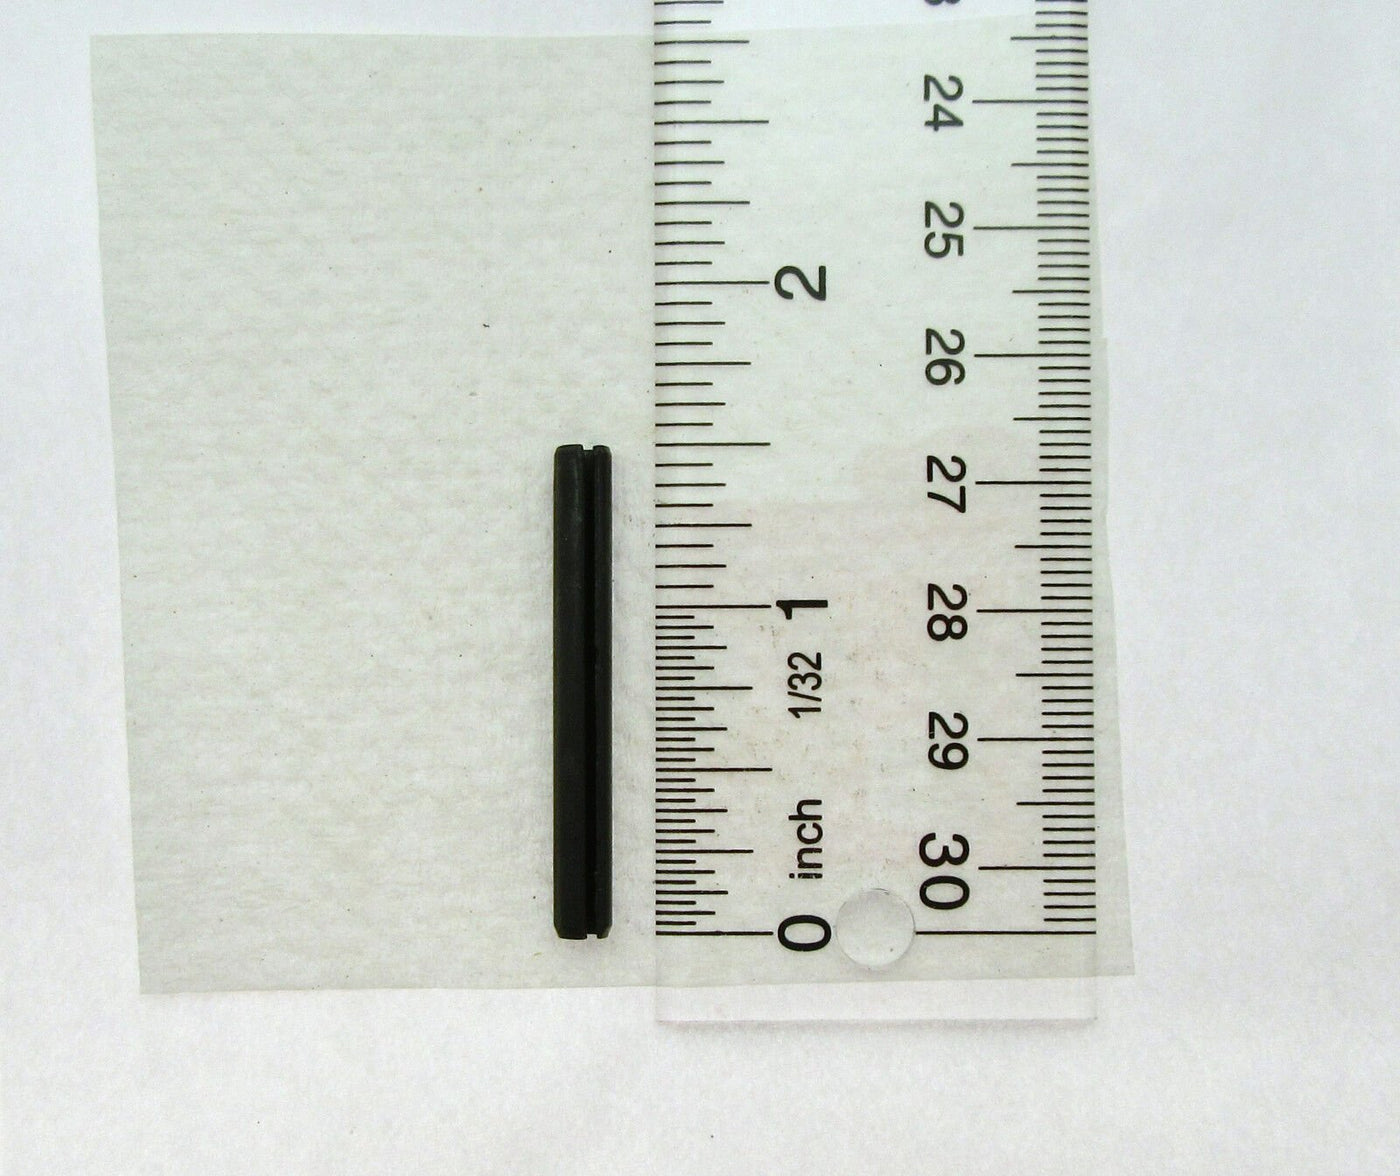 Spring Pin ( Roll Pin ) ~ 5/32 inch X 1 1/2" length ~ Heat Treated Spring Steel